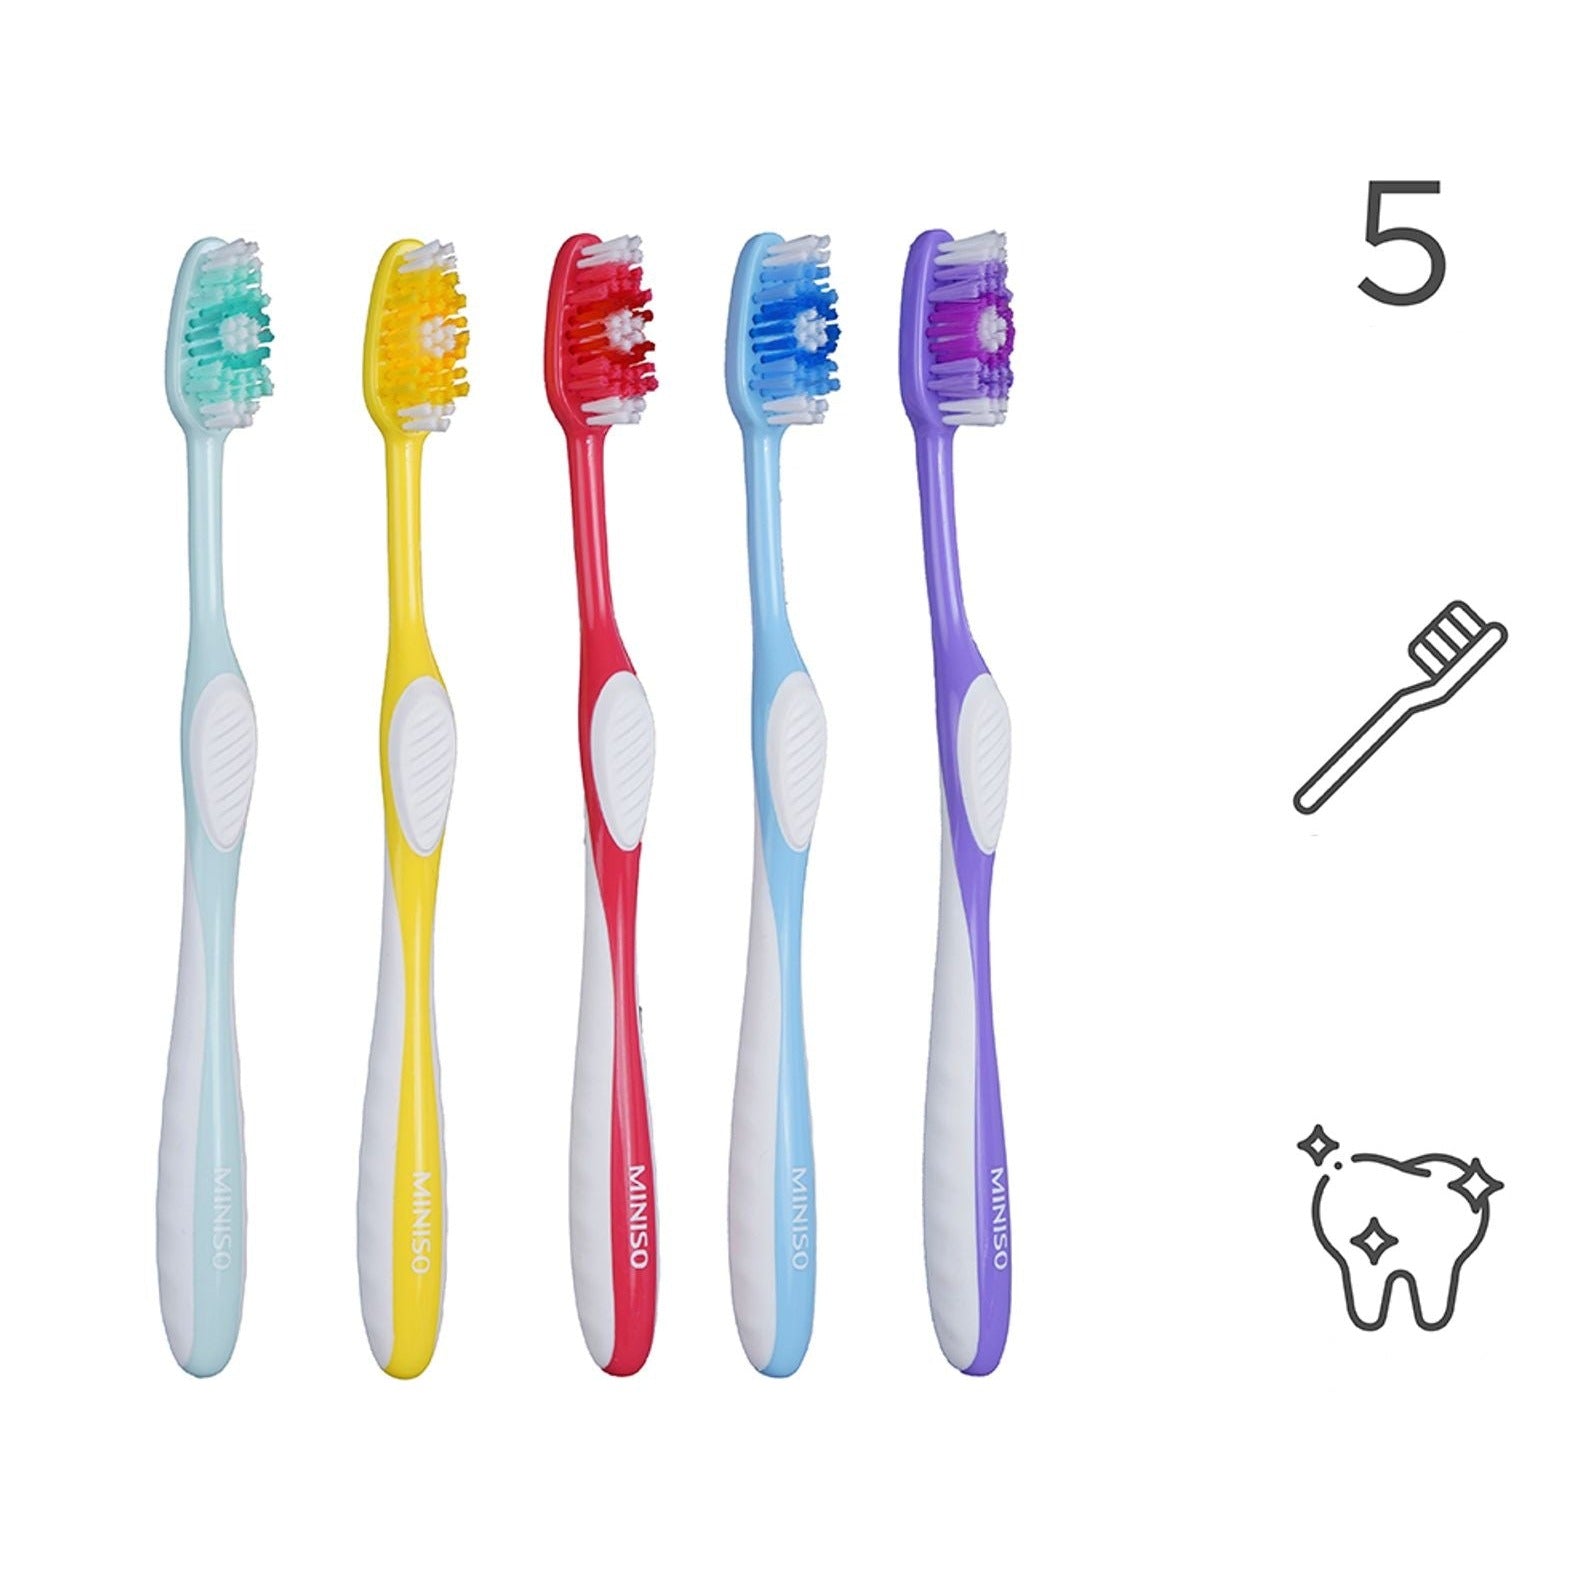 MINISO 360° DEEP CLEANING TOOTHBRUSHES ( 5 PACK ) 2011795010103 TOOTHBRUSH